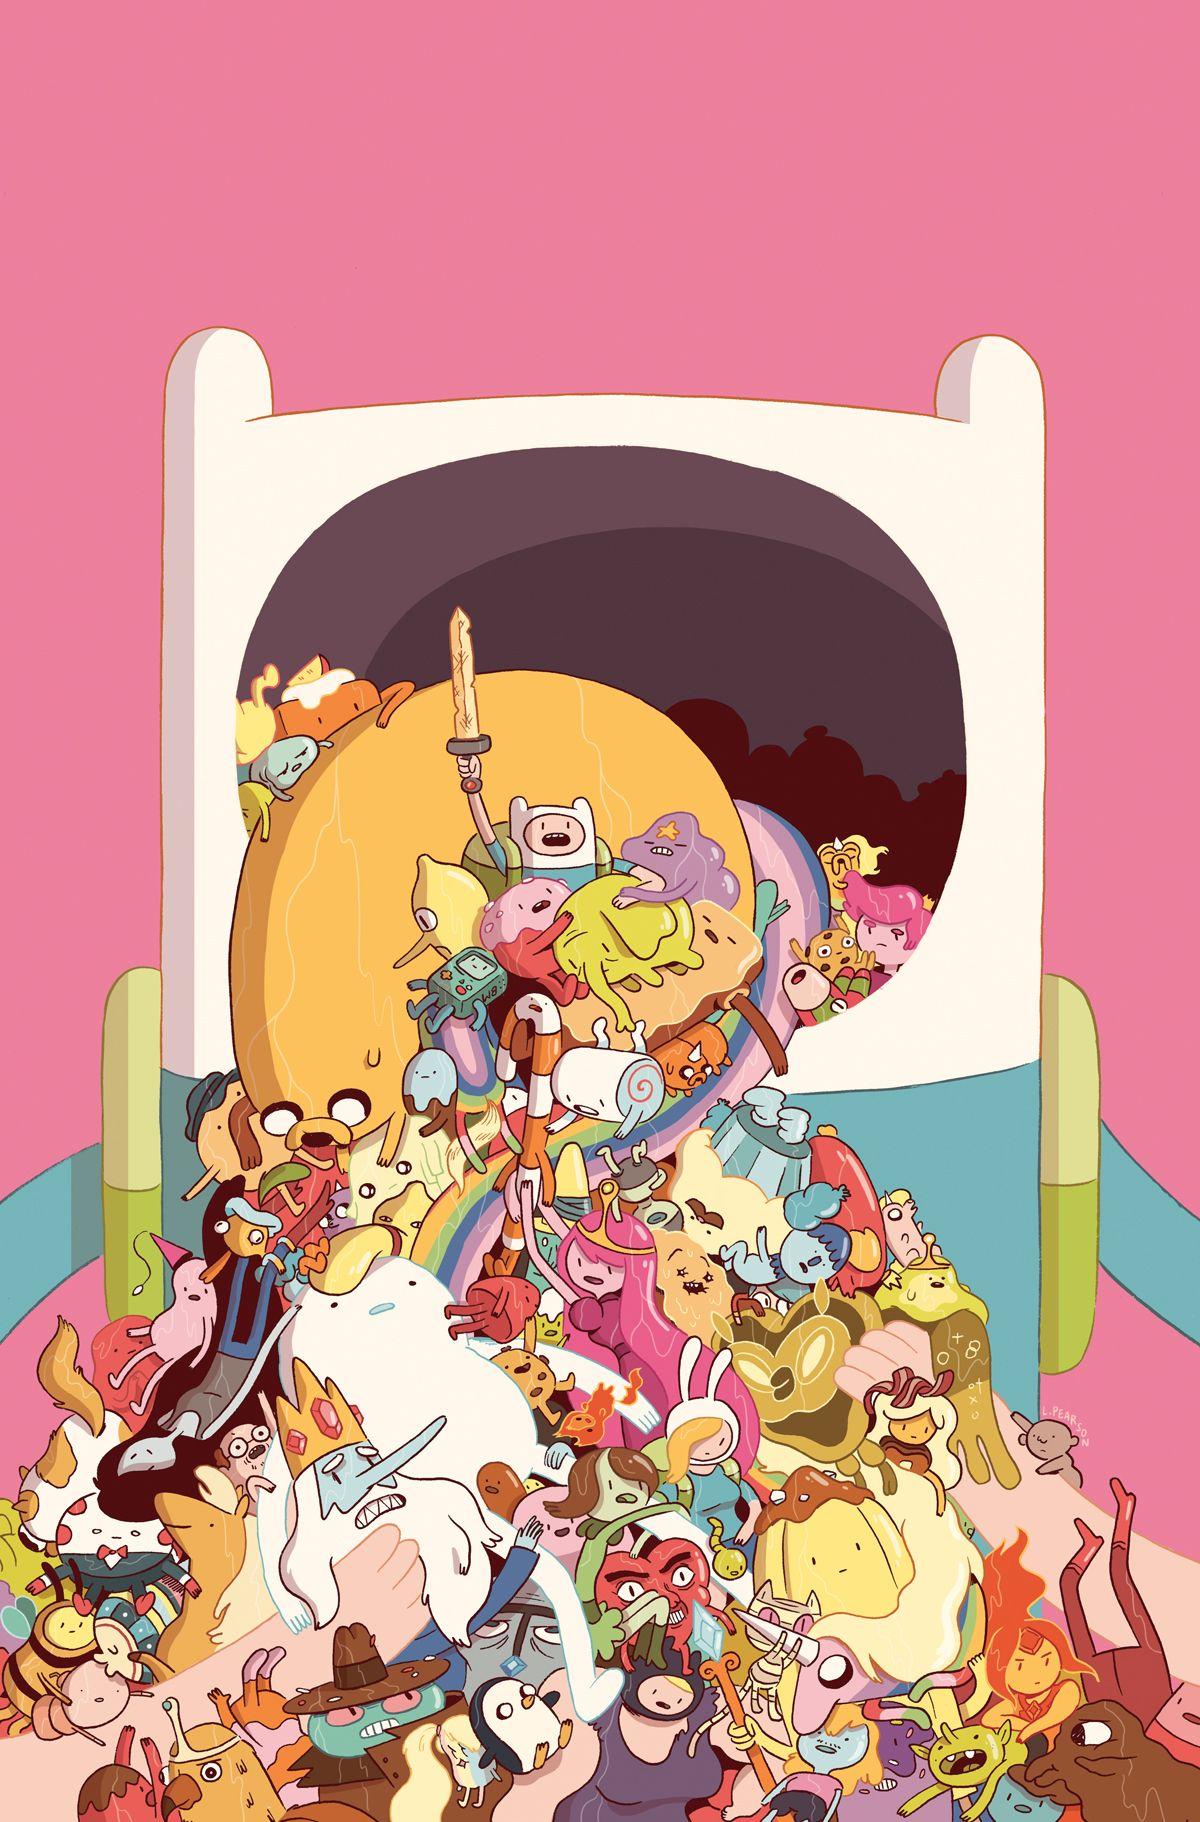 Luke Pearson: This Is A Cover For Adventure Time. Comic, Cartoon